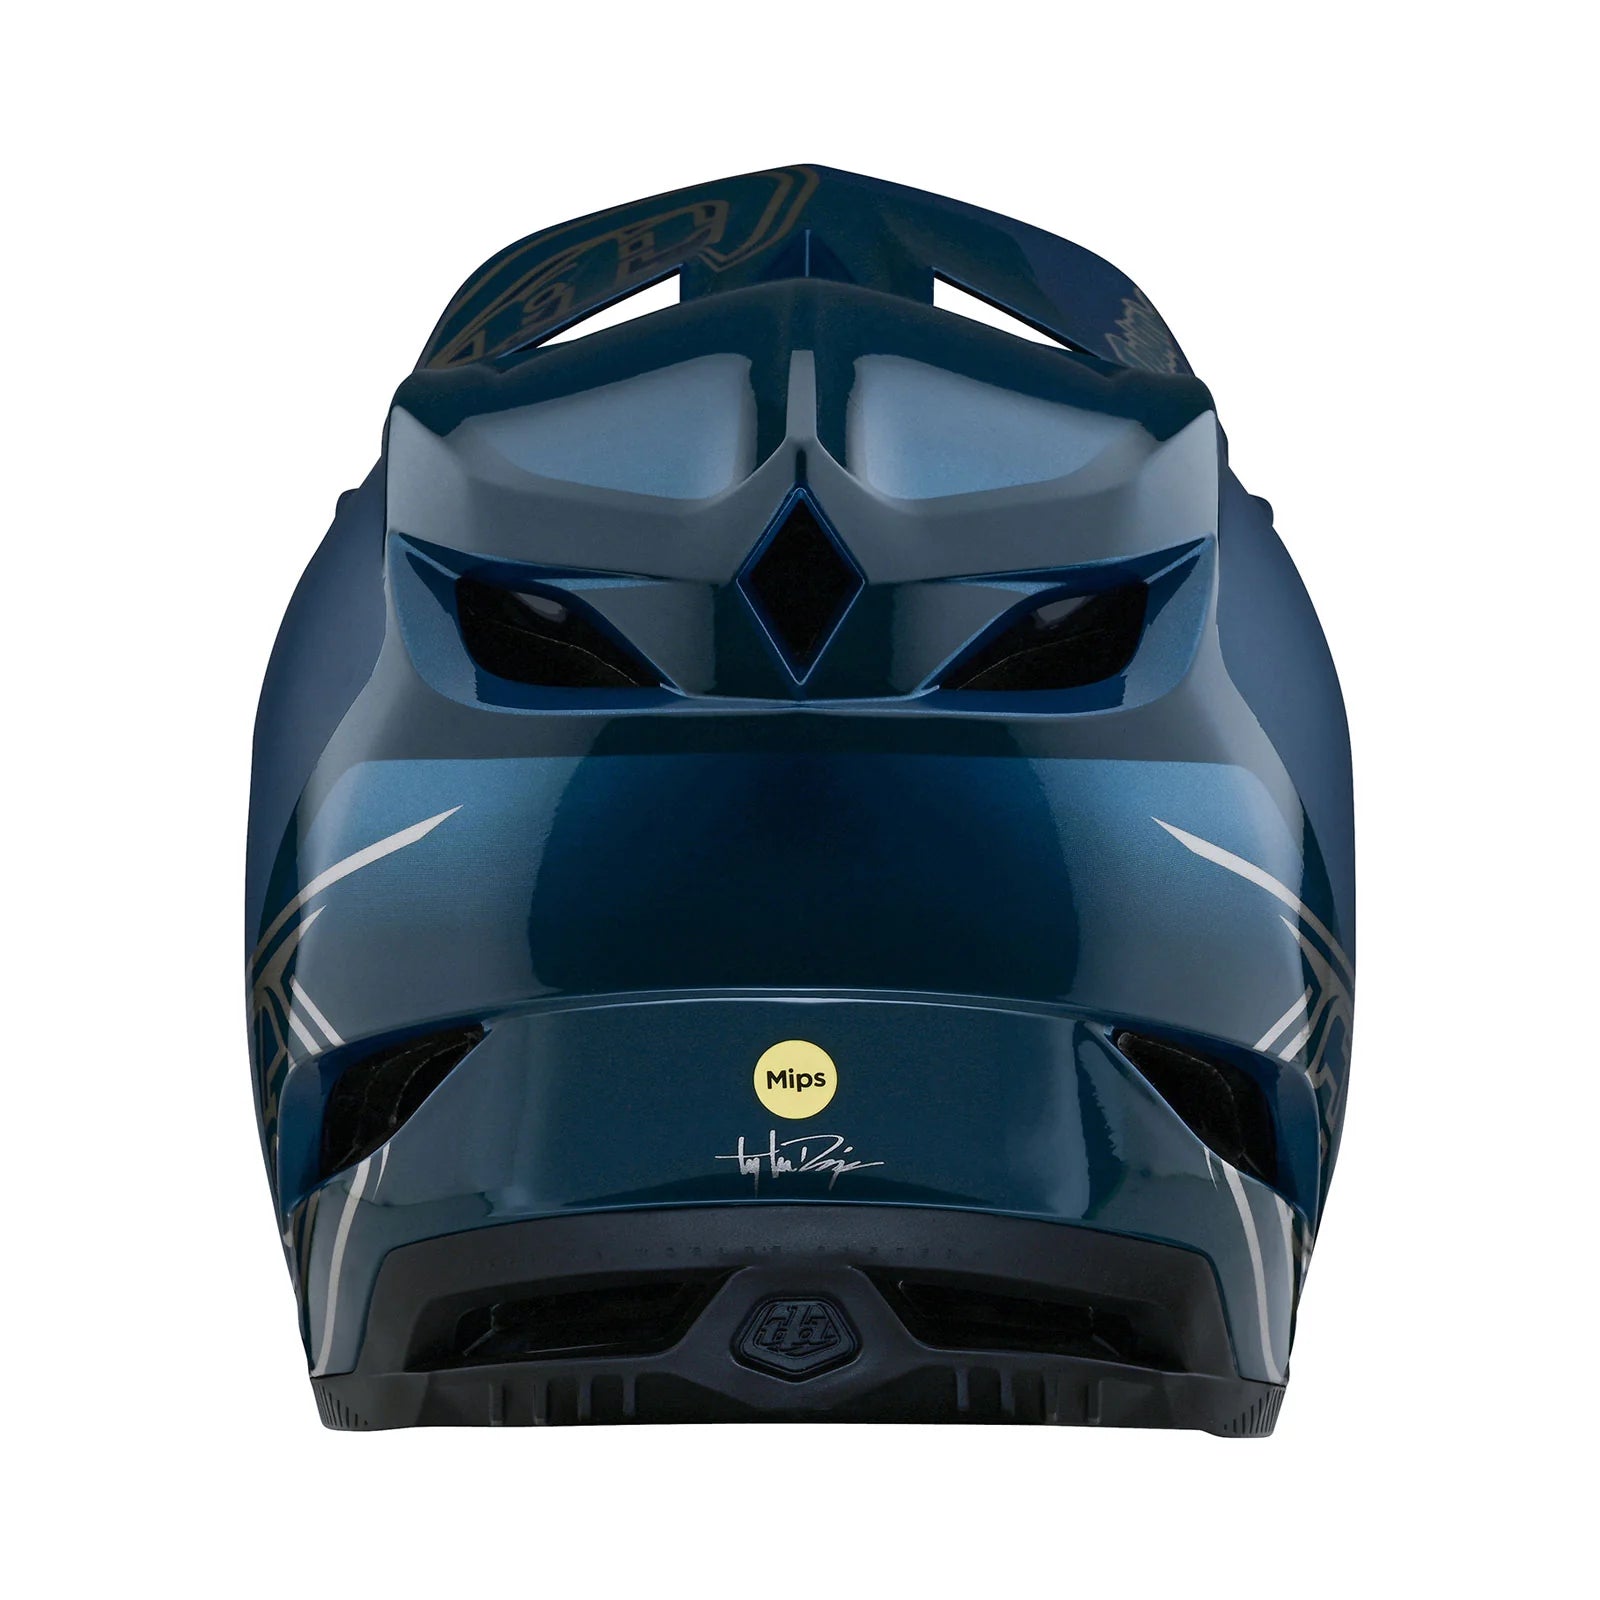 A TLD D4 AS Polyacrylite Helmet W/MIPS Shadow Blue with a black and blue design.